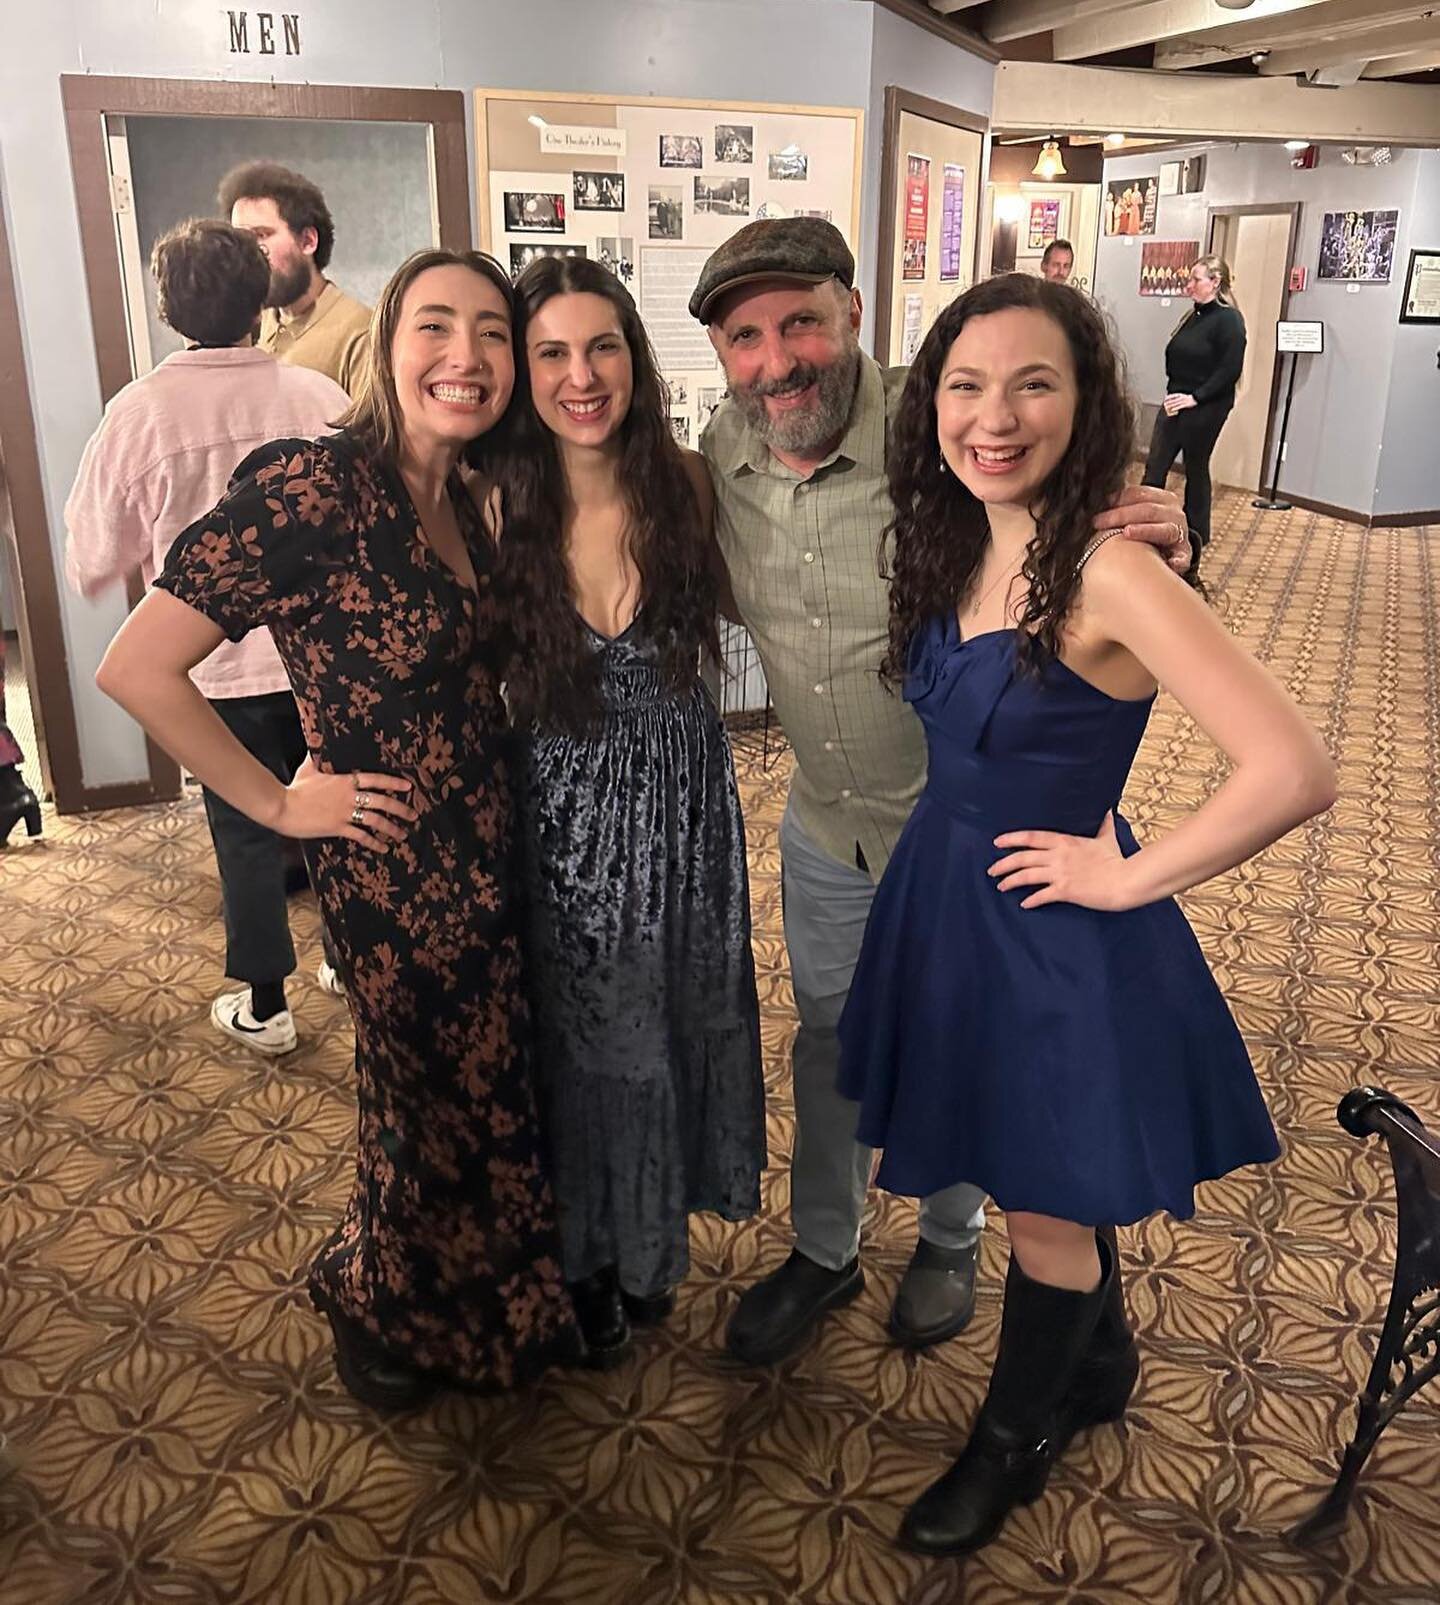 Happy opening weekend to our &ldquo;Fiddler on the Roof&rdquo; family at The Gateway. Couldn&rsquo;t be more grateful to be telling this story with such amazing people. L&rsquo;chaim!🎻🧡🥰